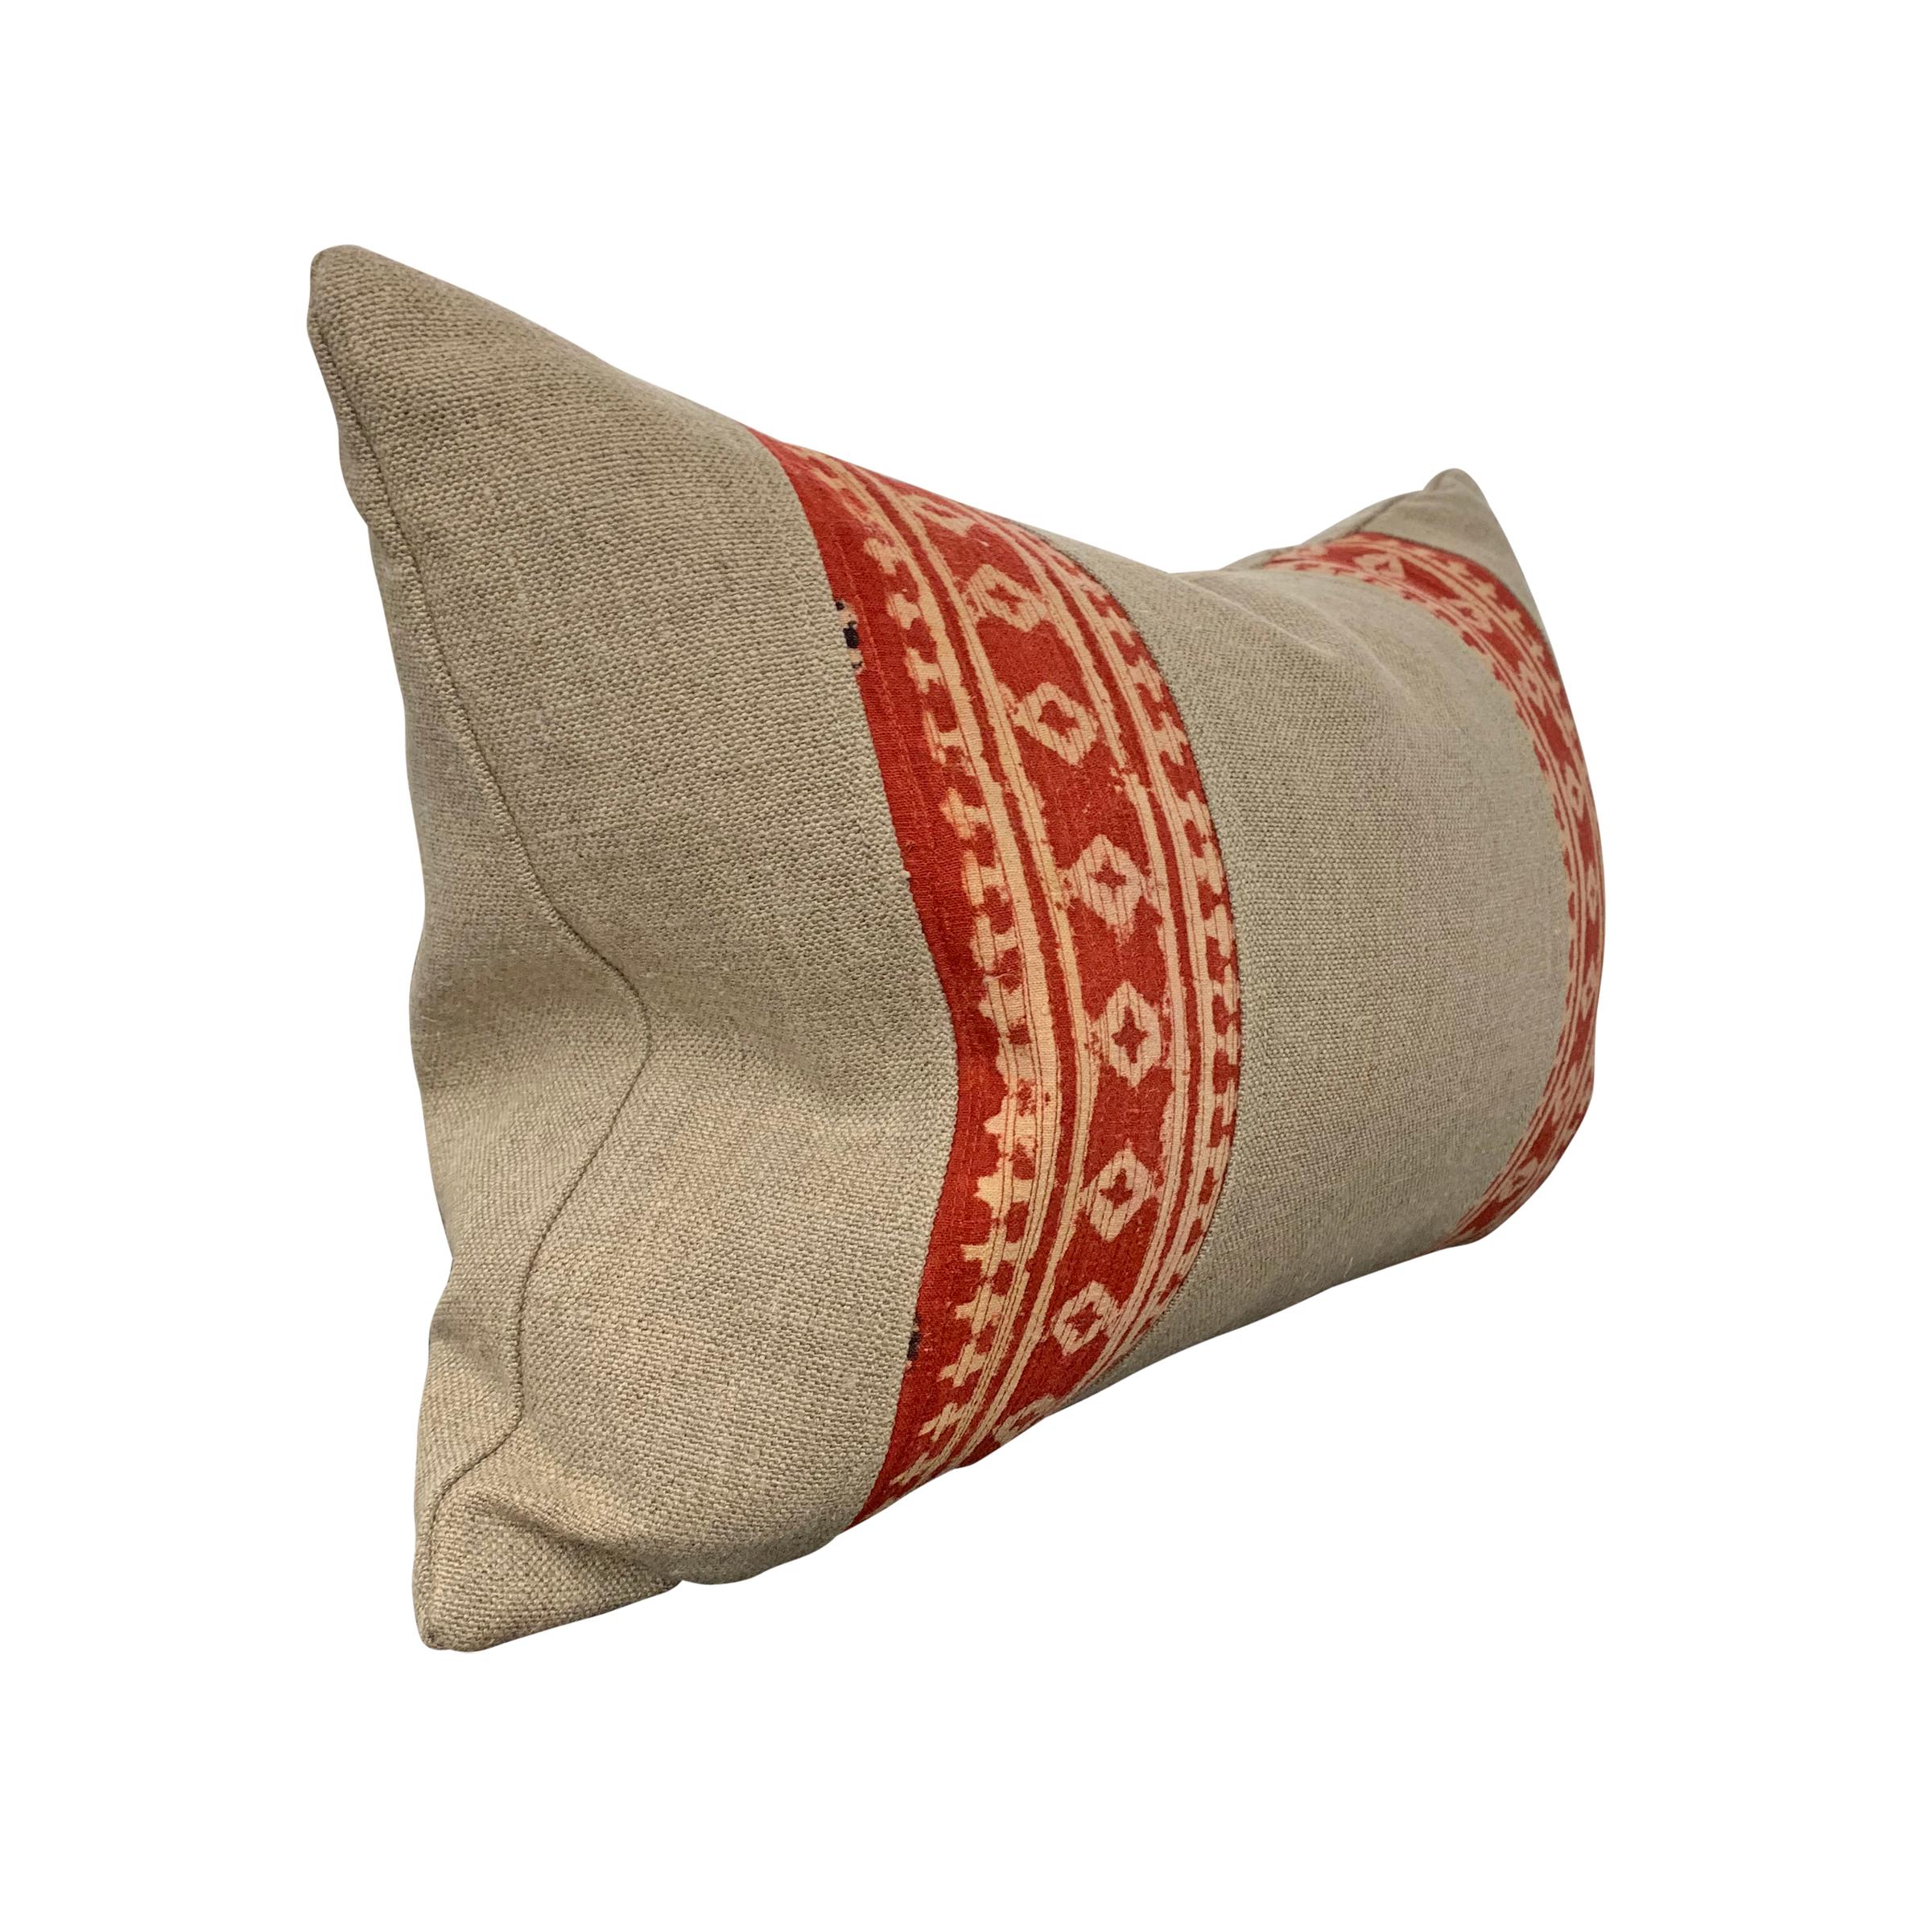 A charming pillow made from two early 20th century Indian block printed panels with repeated diamond patterns, mounted on handwoven Belgian linen, and filled with down.